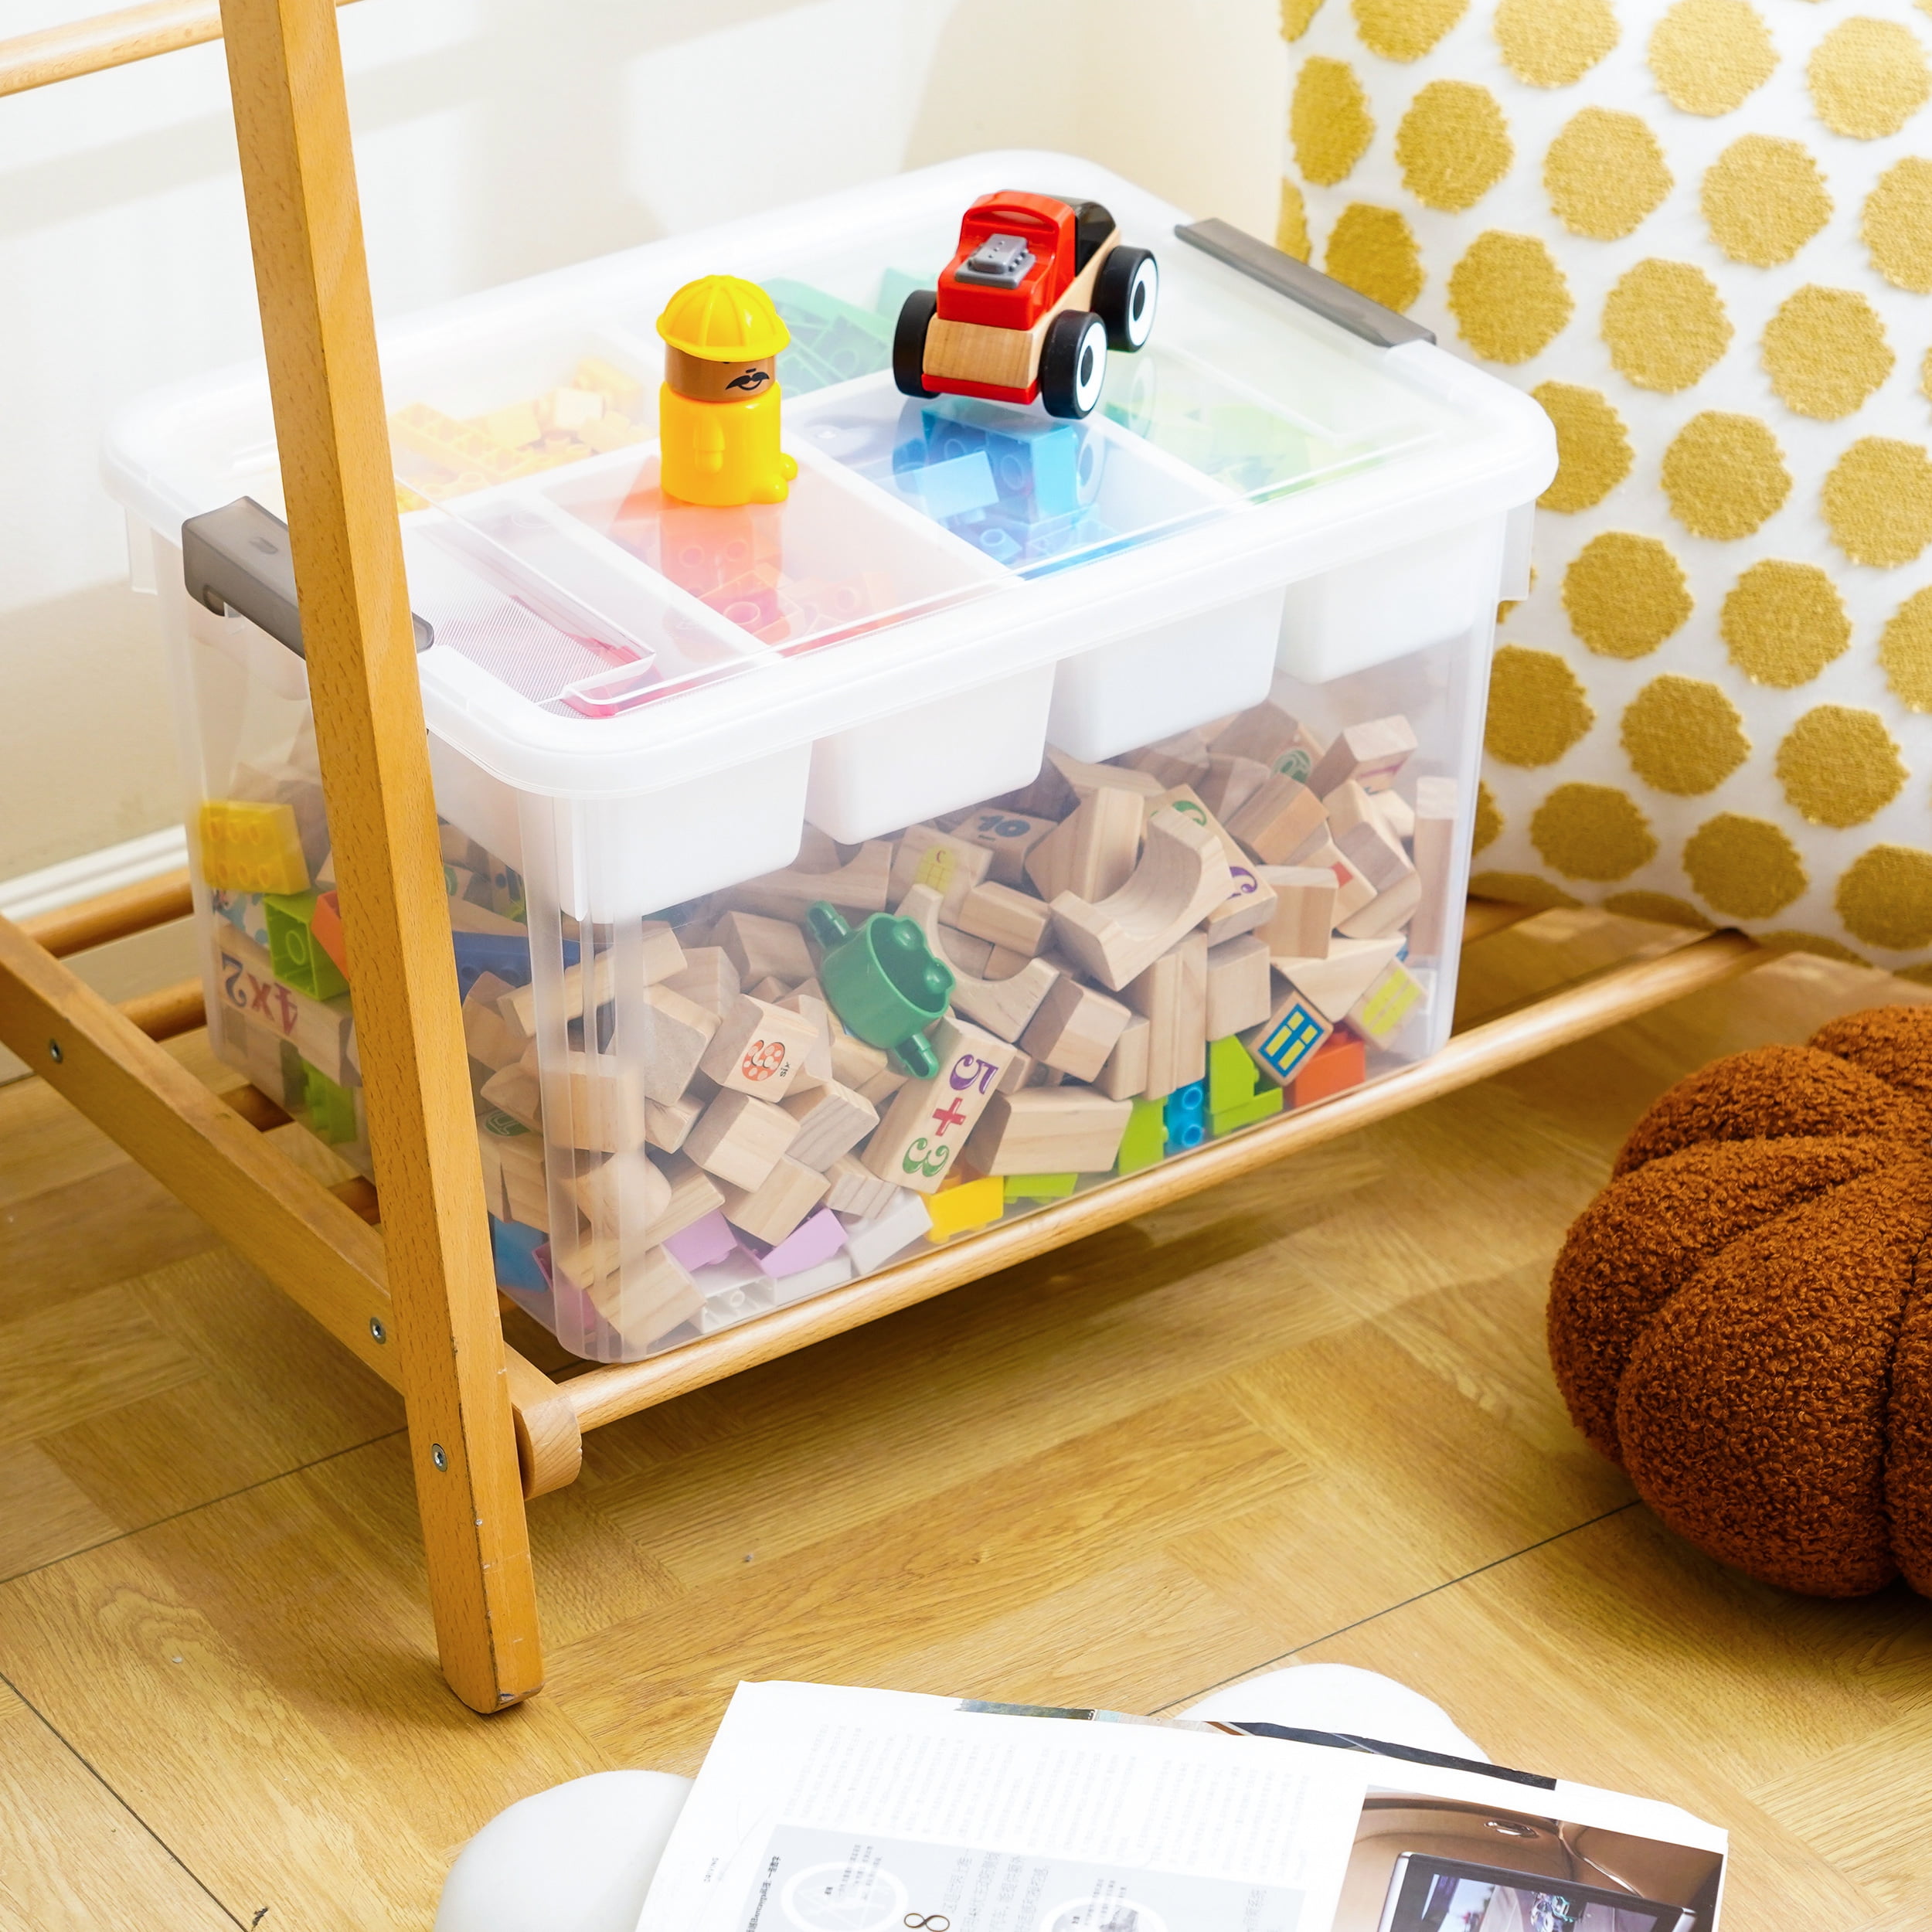  Leinuosen 32 QT Plastic Storage Box with Removable Tray Craft  Organizer and Storage Clear Bins with Lids Art Supply Container for Kids  Organizing Building Bricks Toys Bead Tool Sewing : Arts